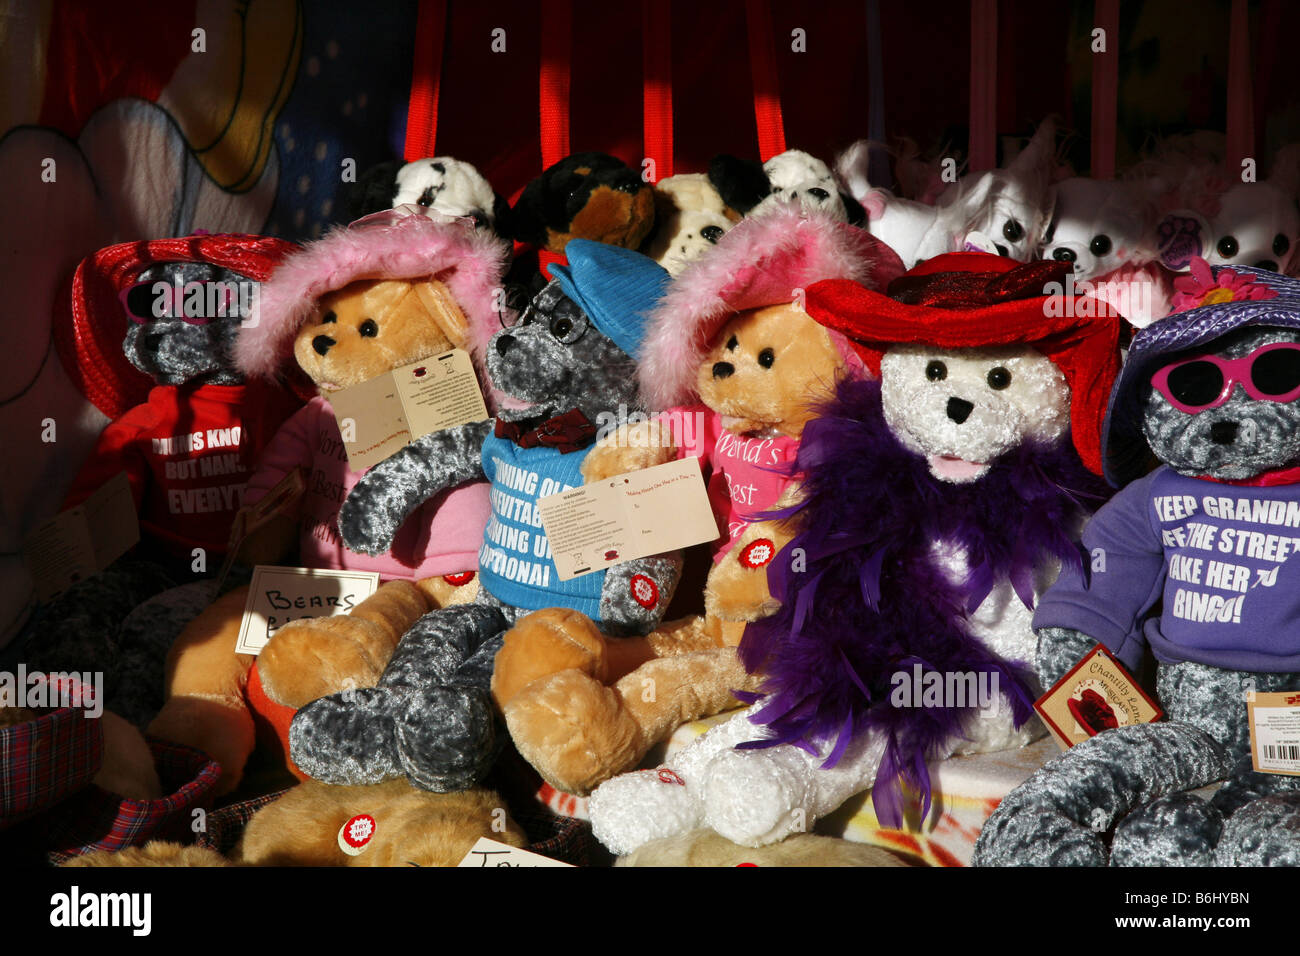 Toy Stall High Resolution Stock Photography and Images - Alamy